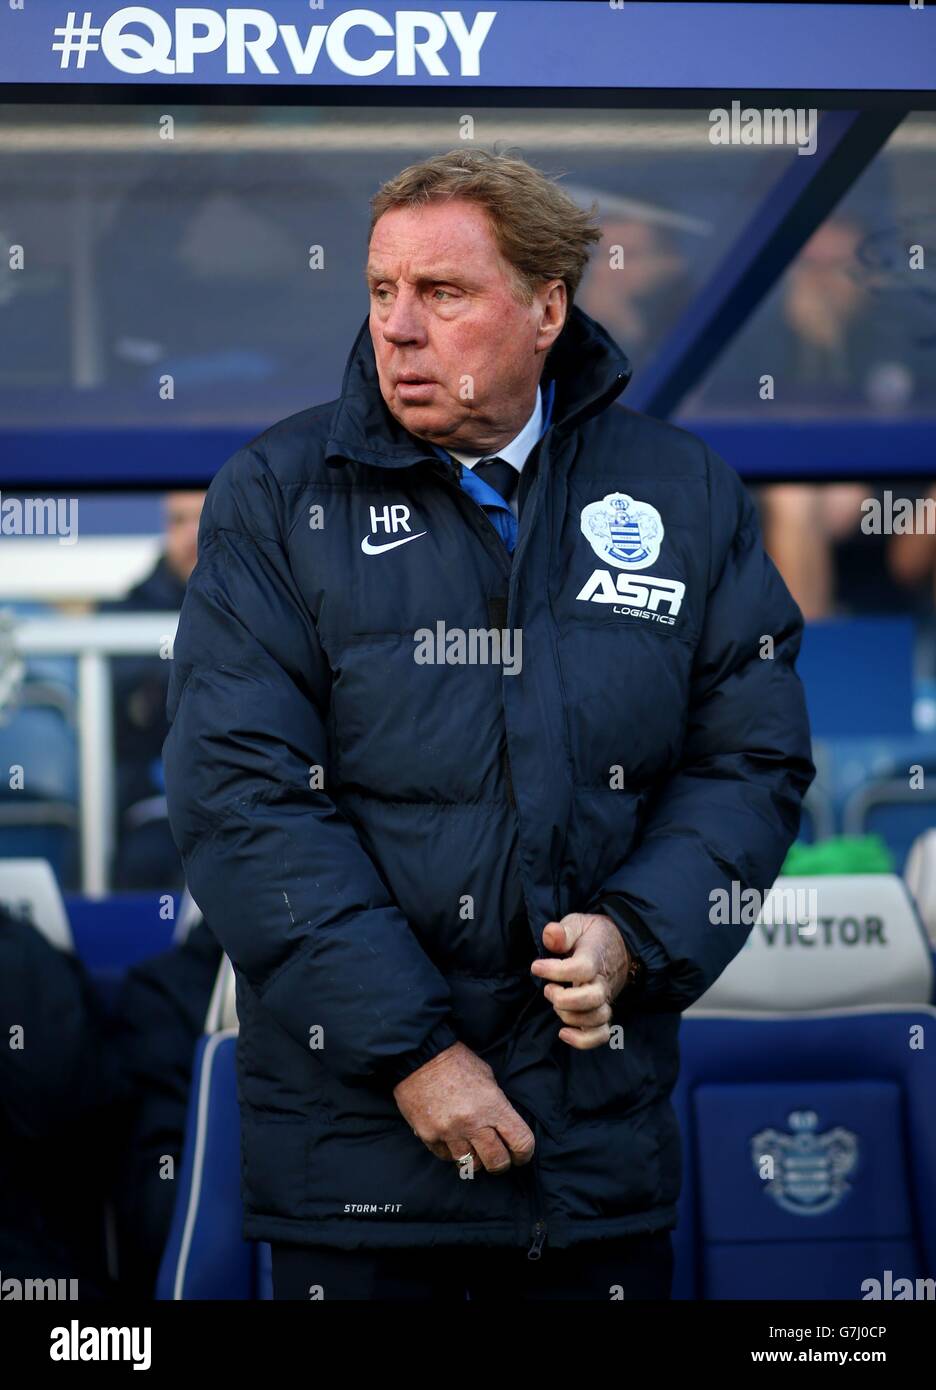 Soccer - Barclays Premier League - Queens Park Rangers v Crystal Palace - Loftus Road. Queens Park Rangers manager Harry Redknapp struggles to zip up his jacket during the Barclays Premier League match at Loftus Road, London. Stock Photo